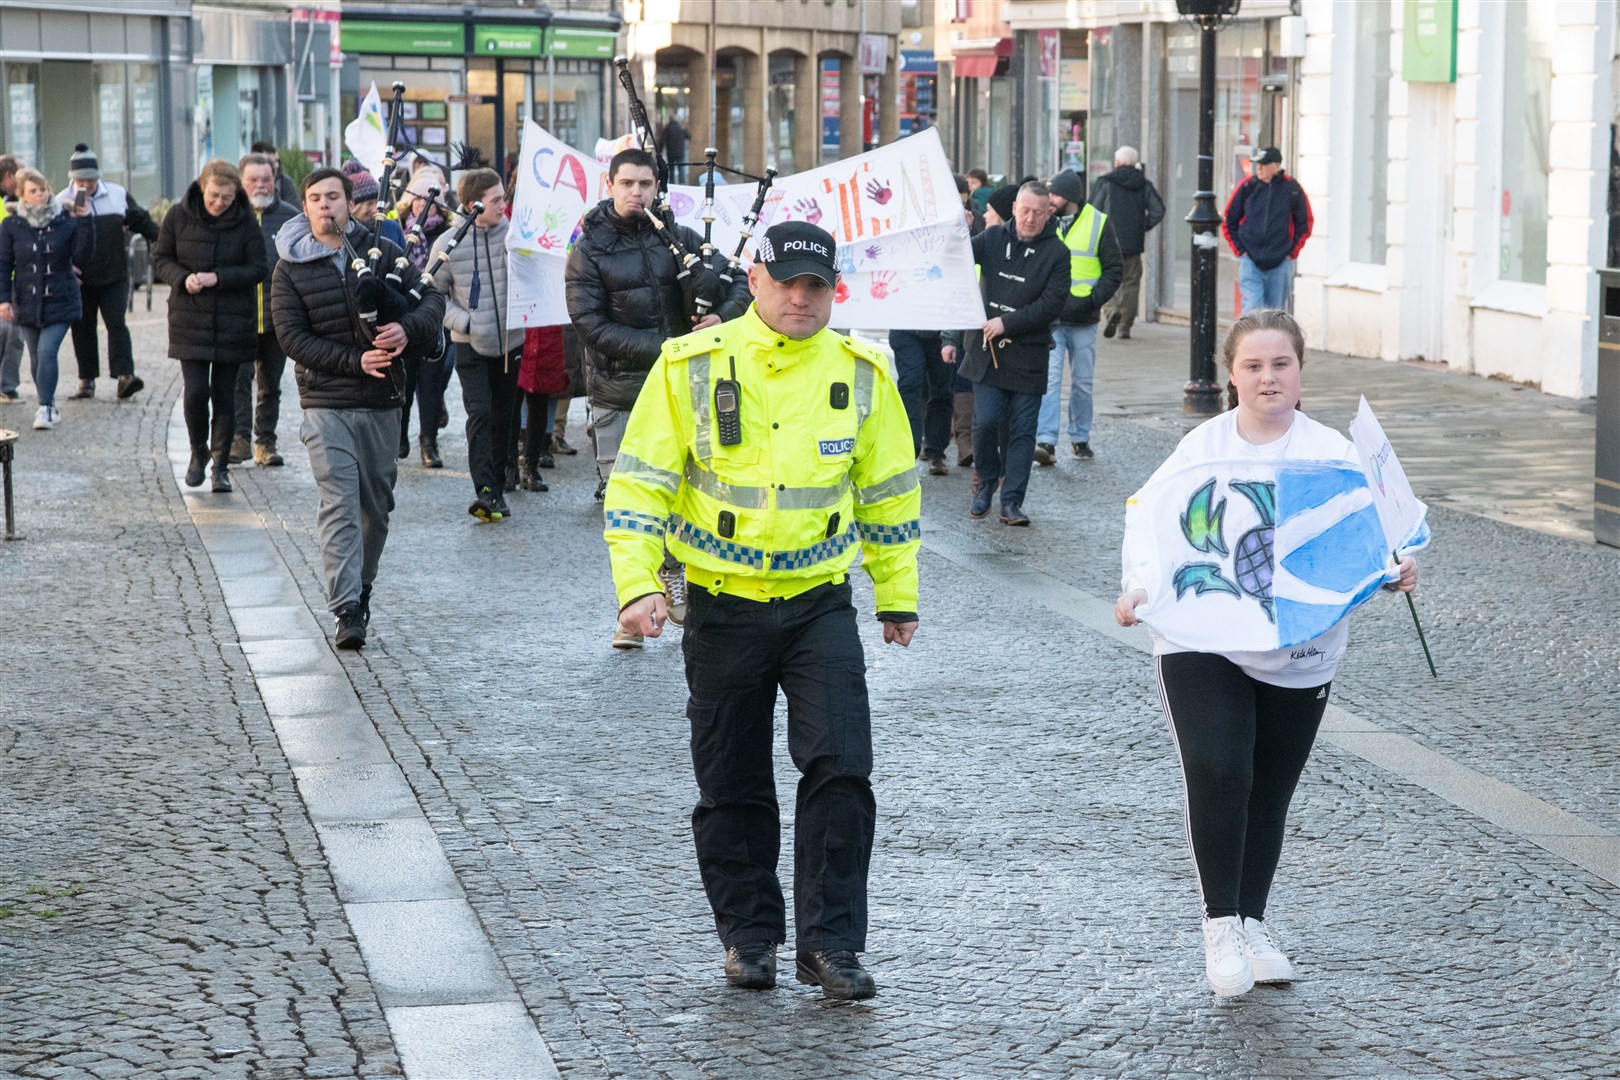 They marched from the Council HQ, around the Plainstones and then back to the HQ...Moray Council celebrate Care day - a national day of recognising and celebrating care experience. ..Picture: Daniel Forsyth..